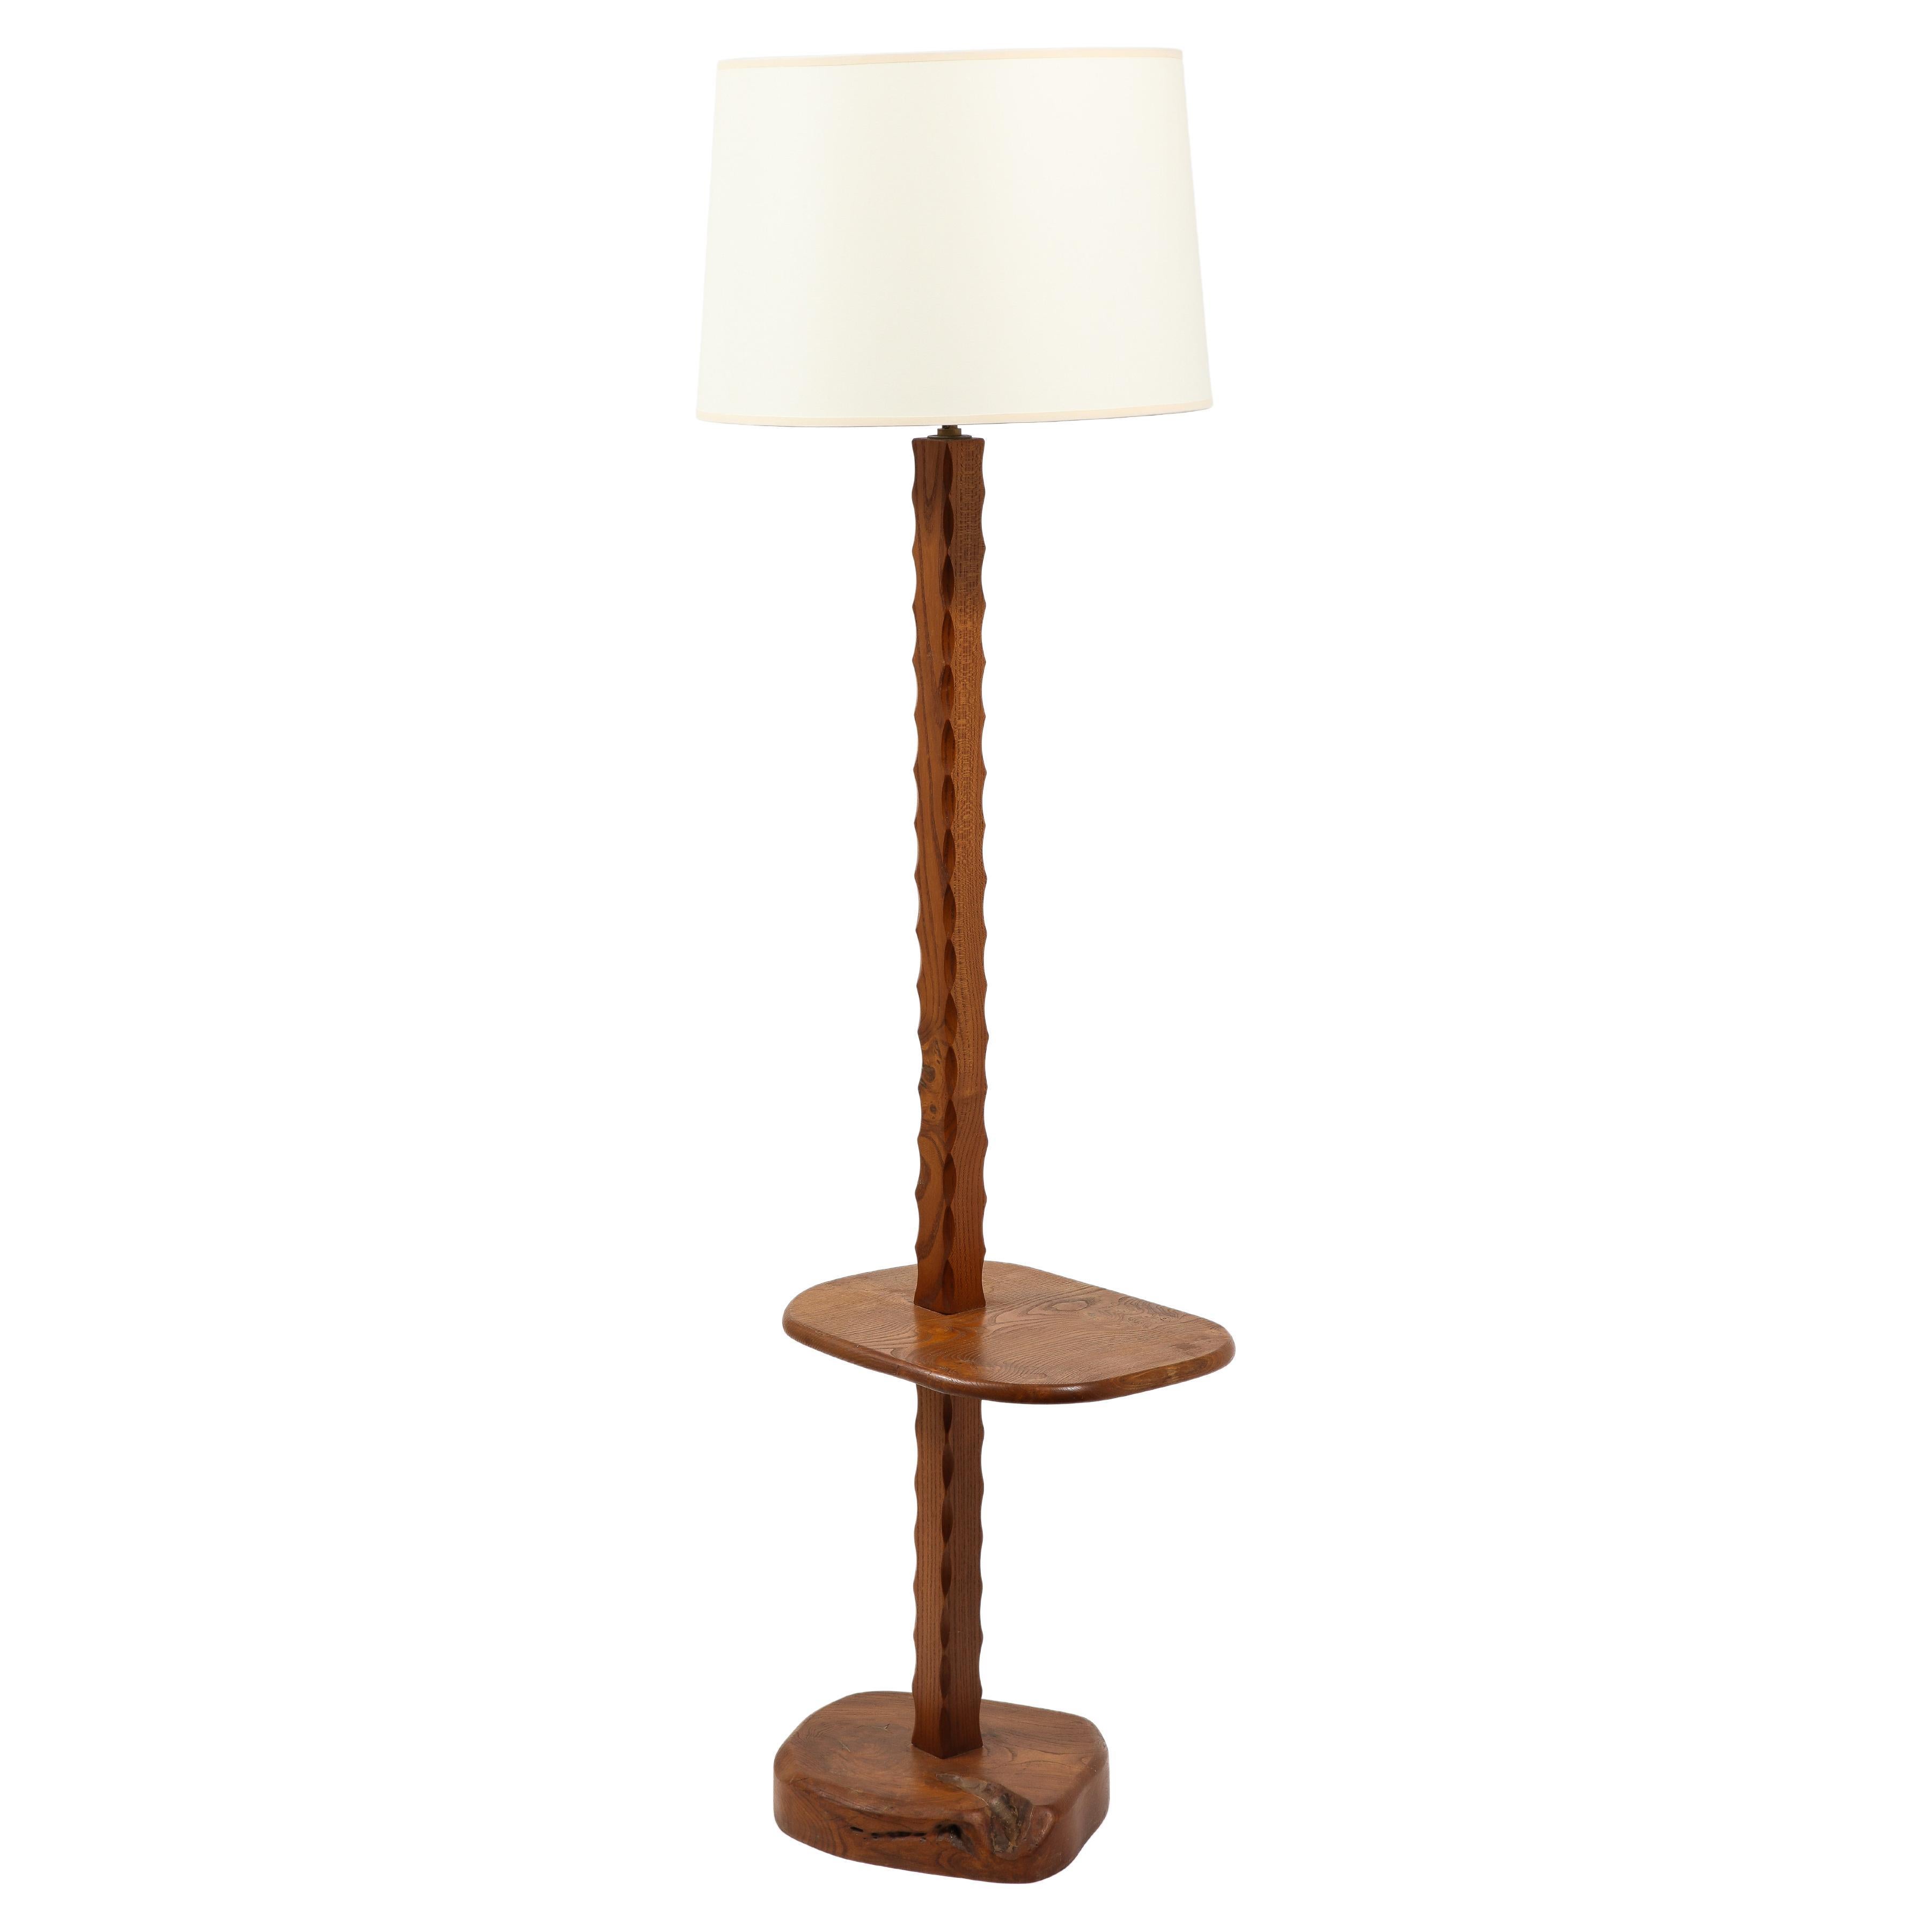 Solid Elm Floor Lamp With Shelf, France 1950's For Sale